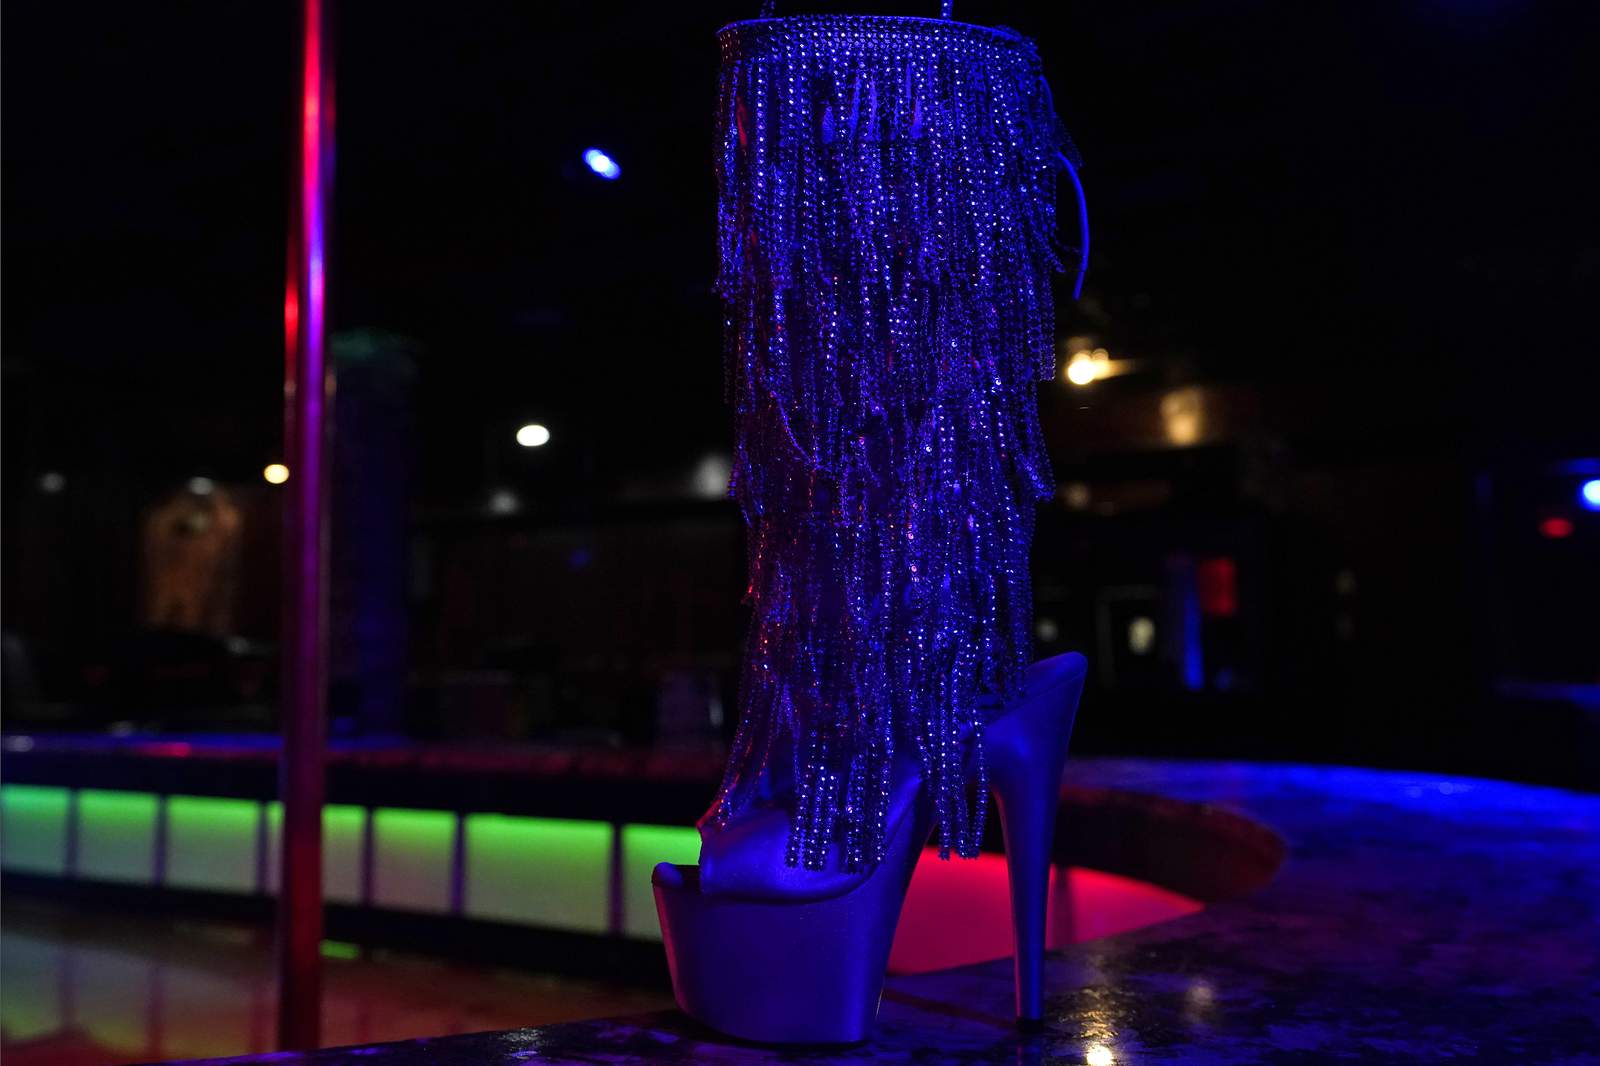 Tampa's famed strip clubs brace for an unusual Super Bowl